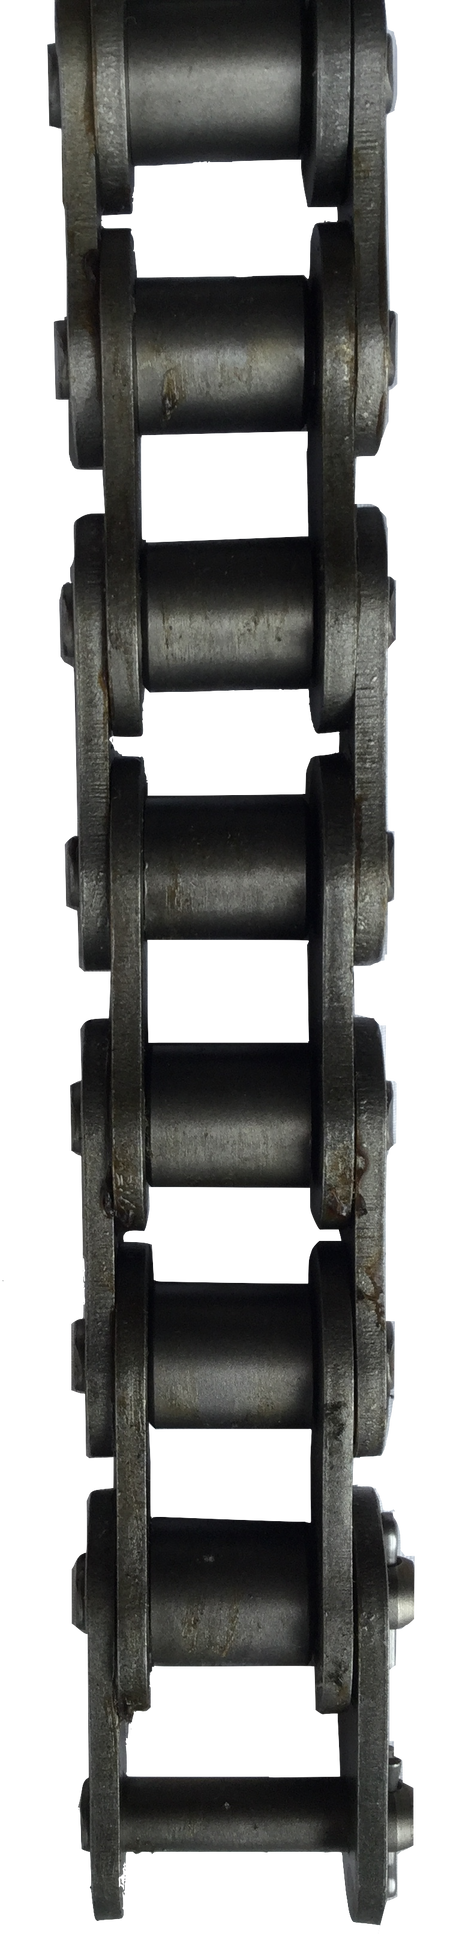 HKK #140 Standard Riveted Roller Chain (1.750" Pitch) - SOLD BY THE FOOT - Froedge Machine & Supply Co., Inc.